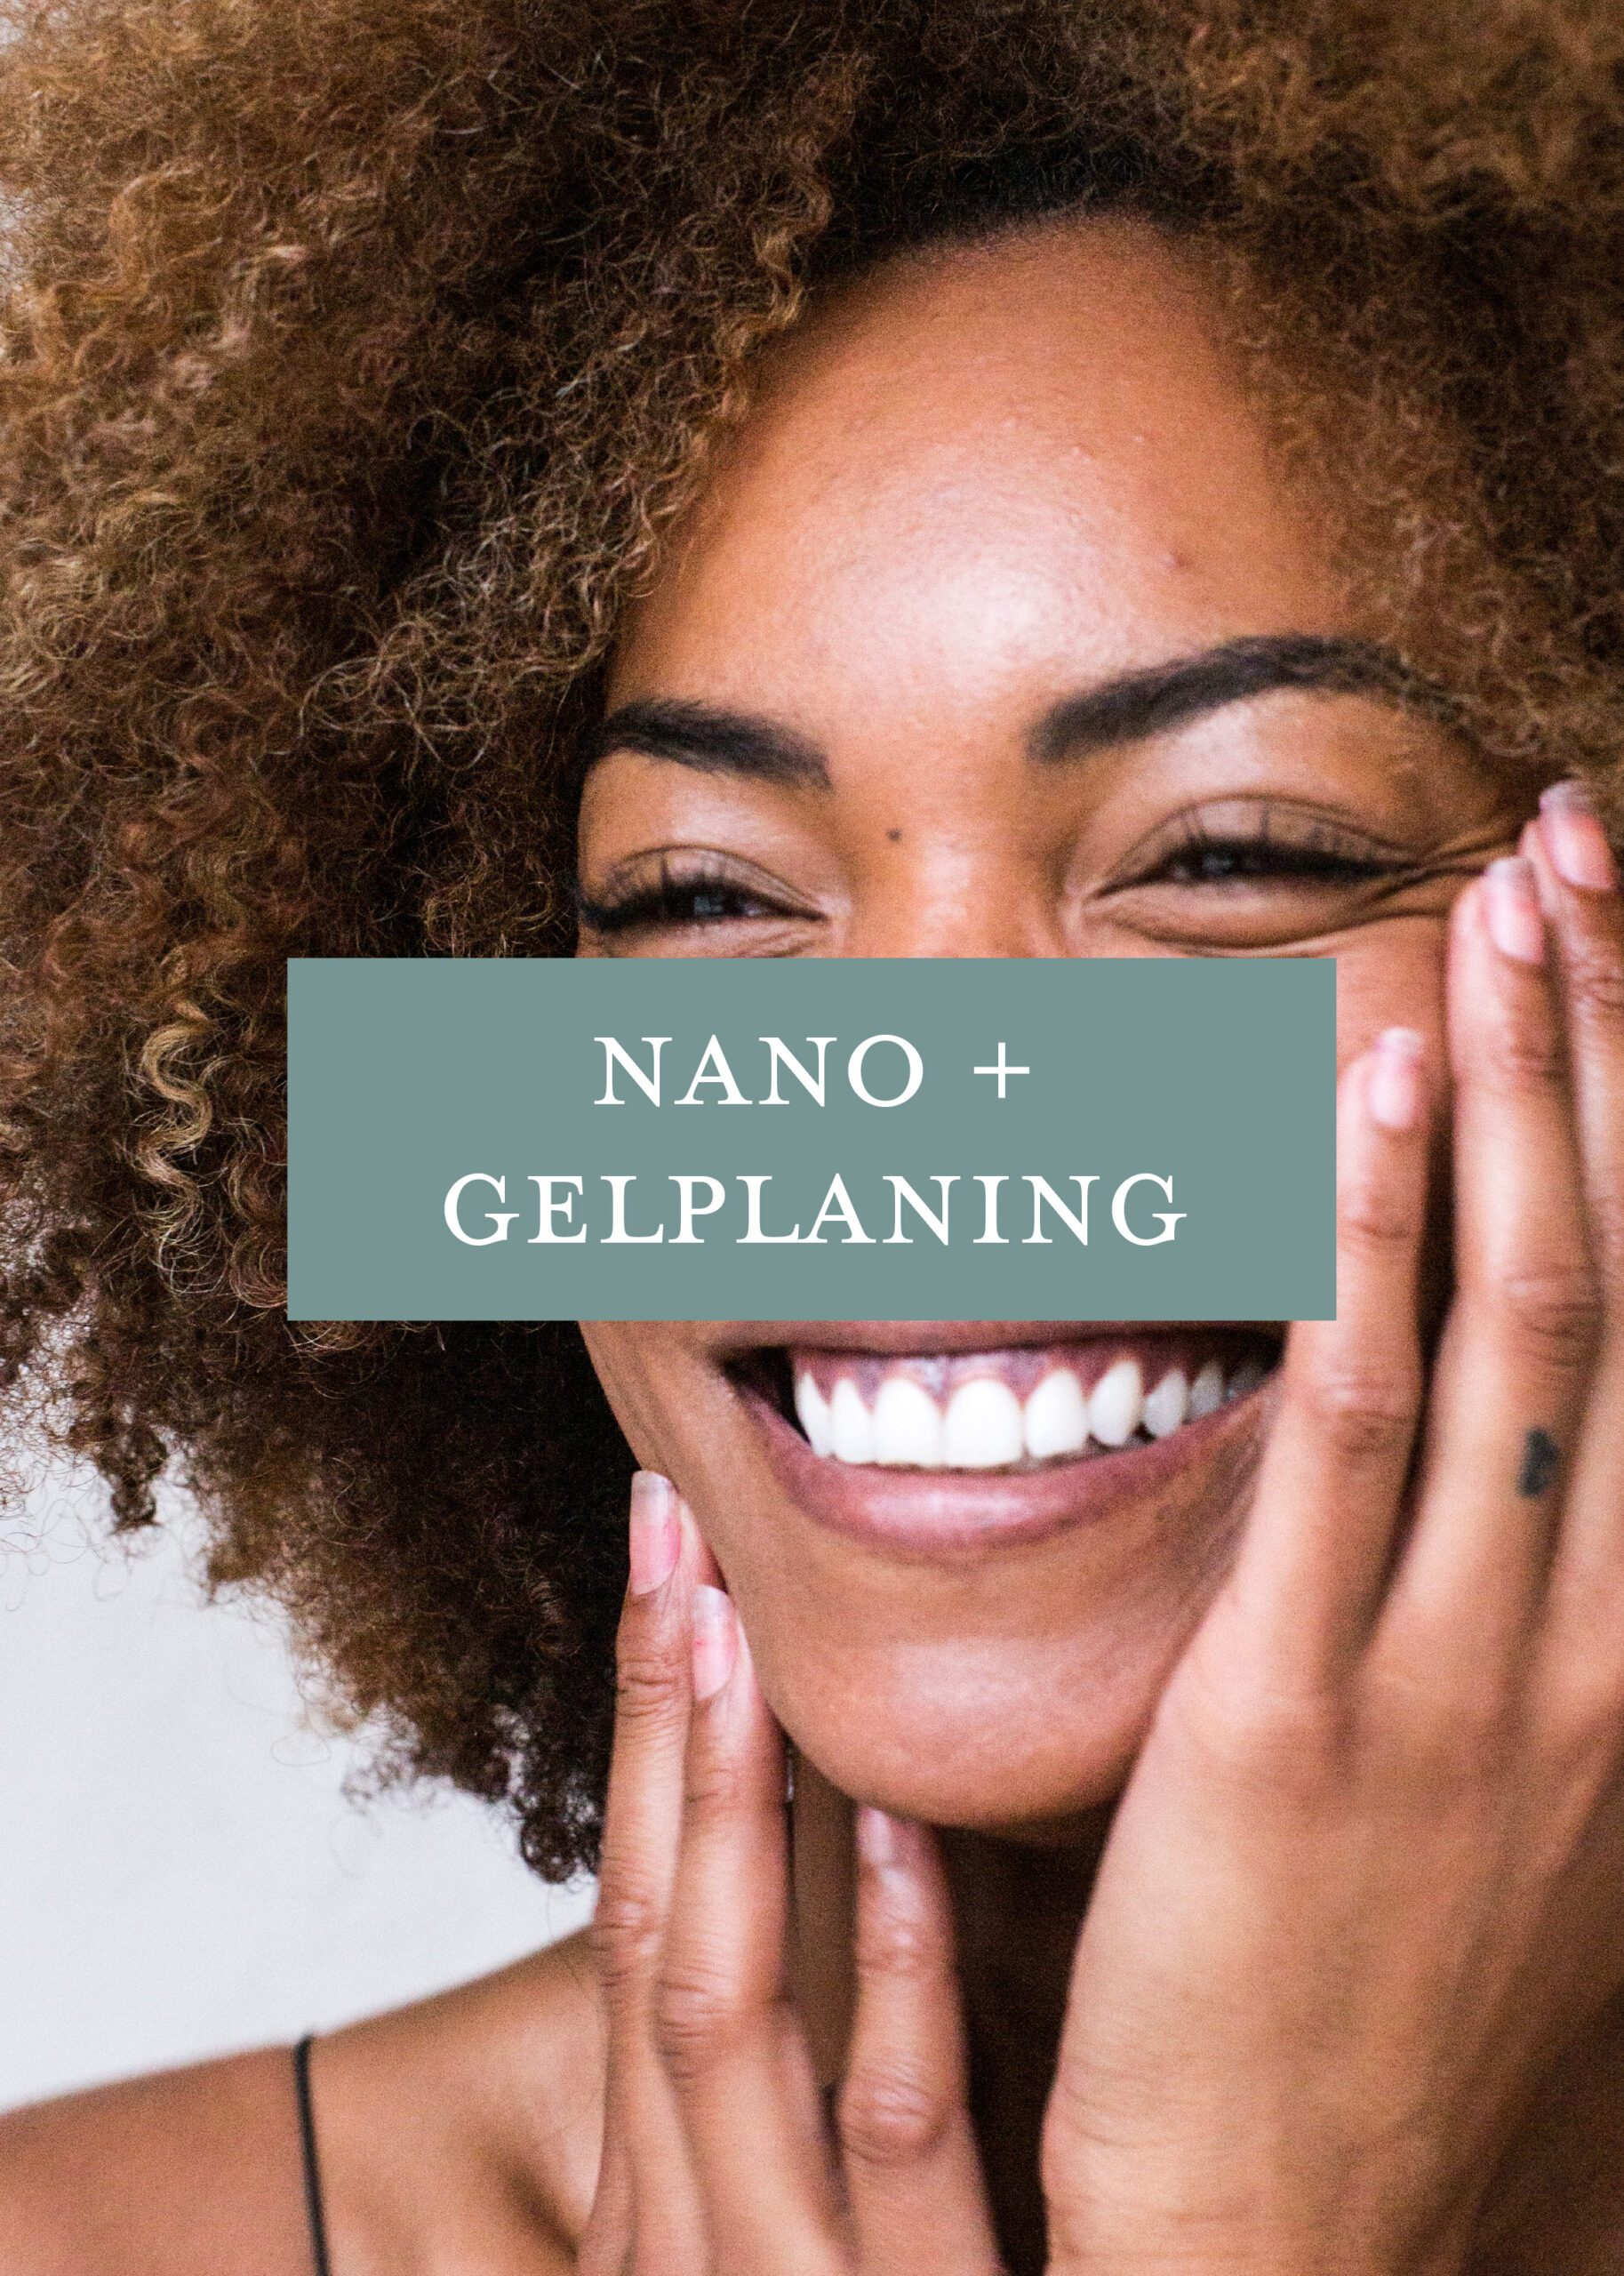 nano and gelplaning